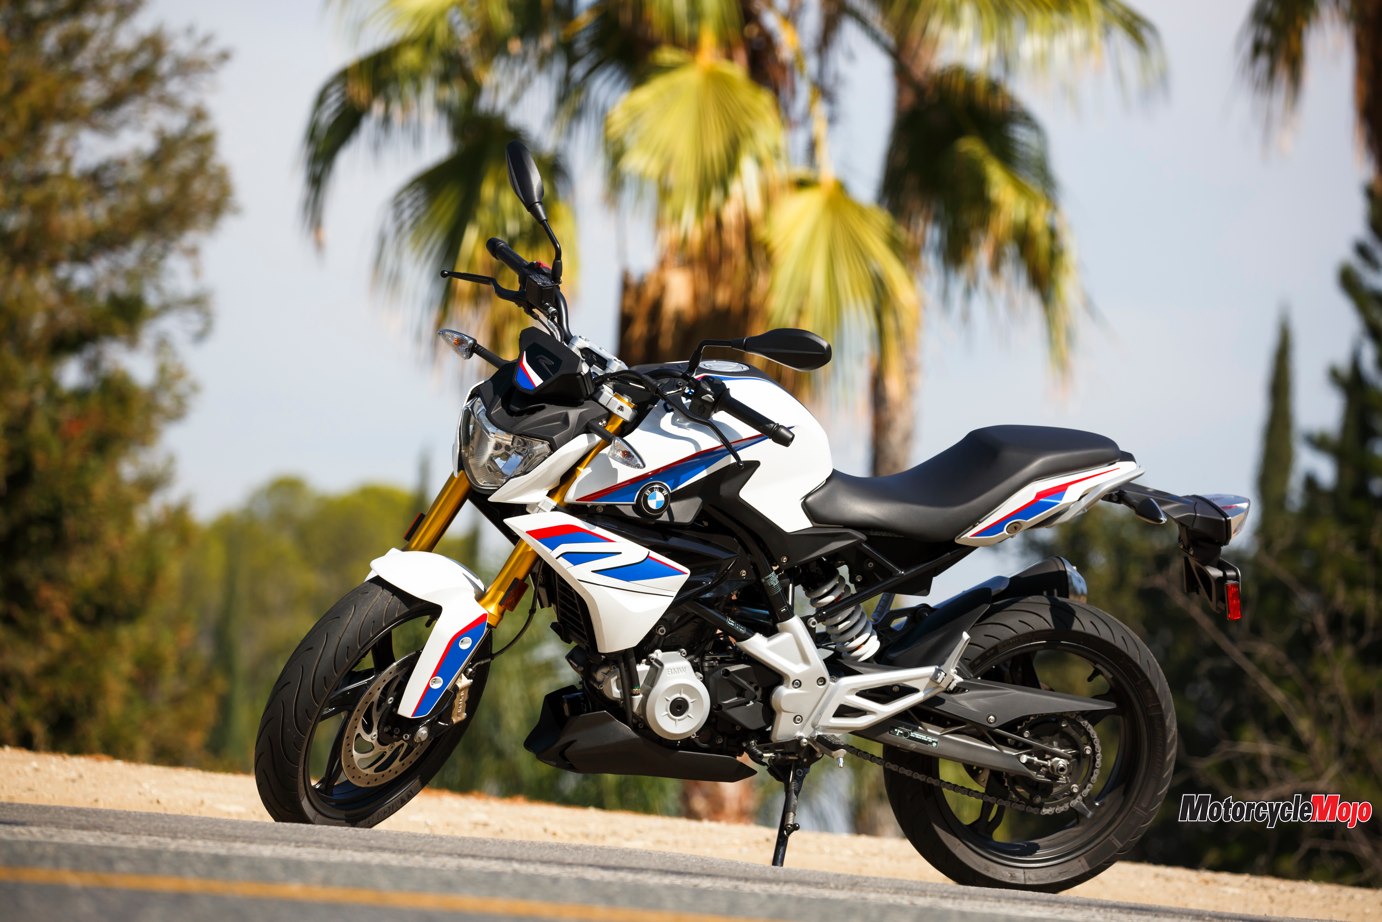 2017 BMW G310R Review and Test Ride - Motorcycle Mojo Magazine